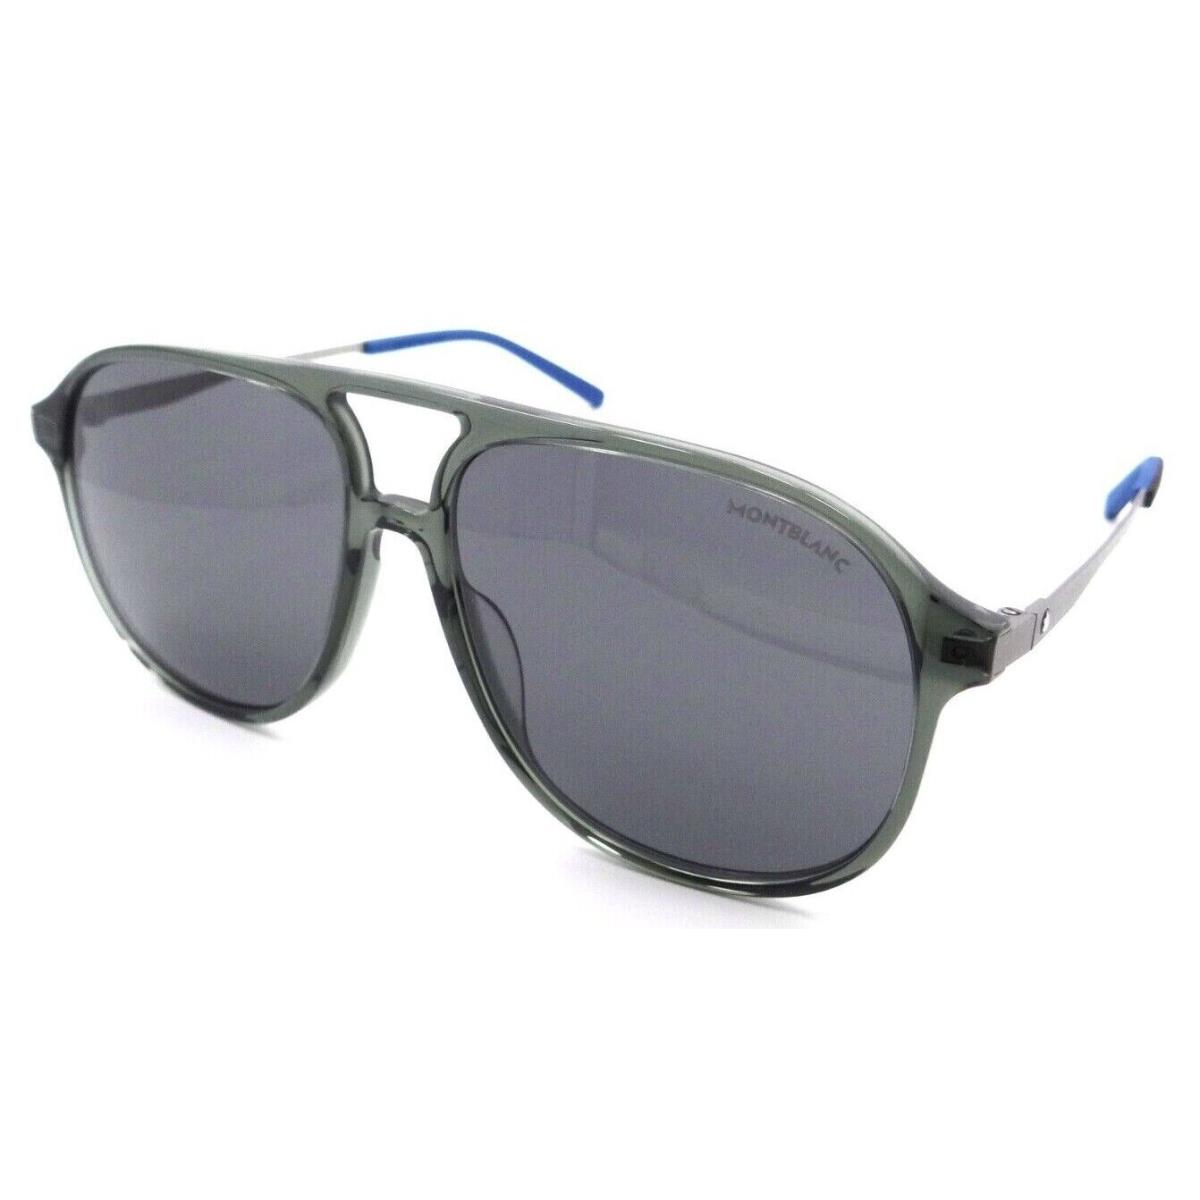 Montblanc Sunglasses MB0118S 003 59-15-145 Grey - Ruthenium / Grey Made in Italy